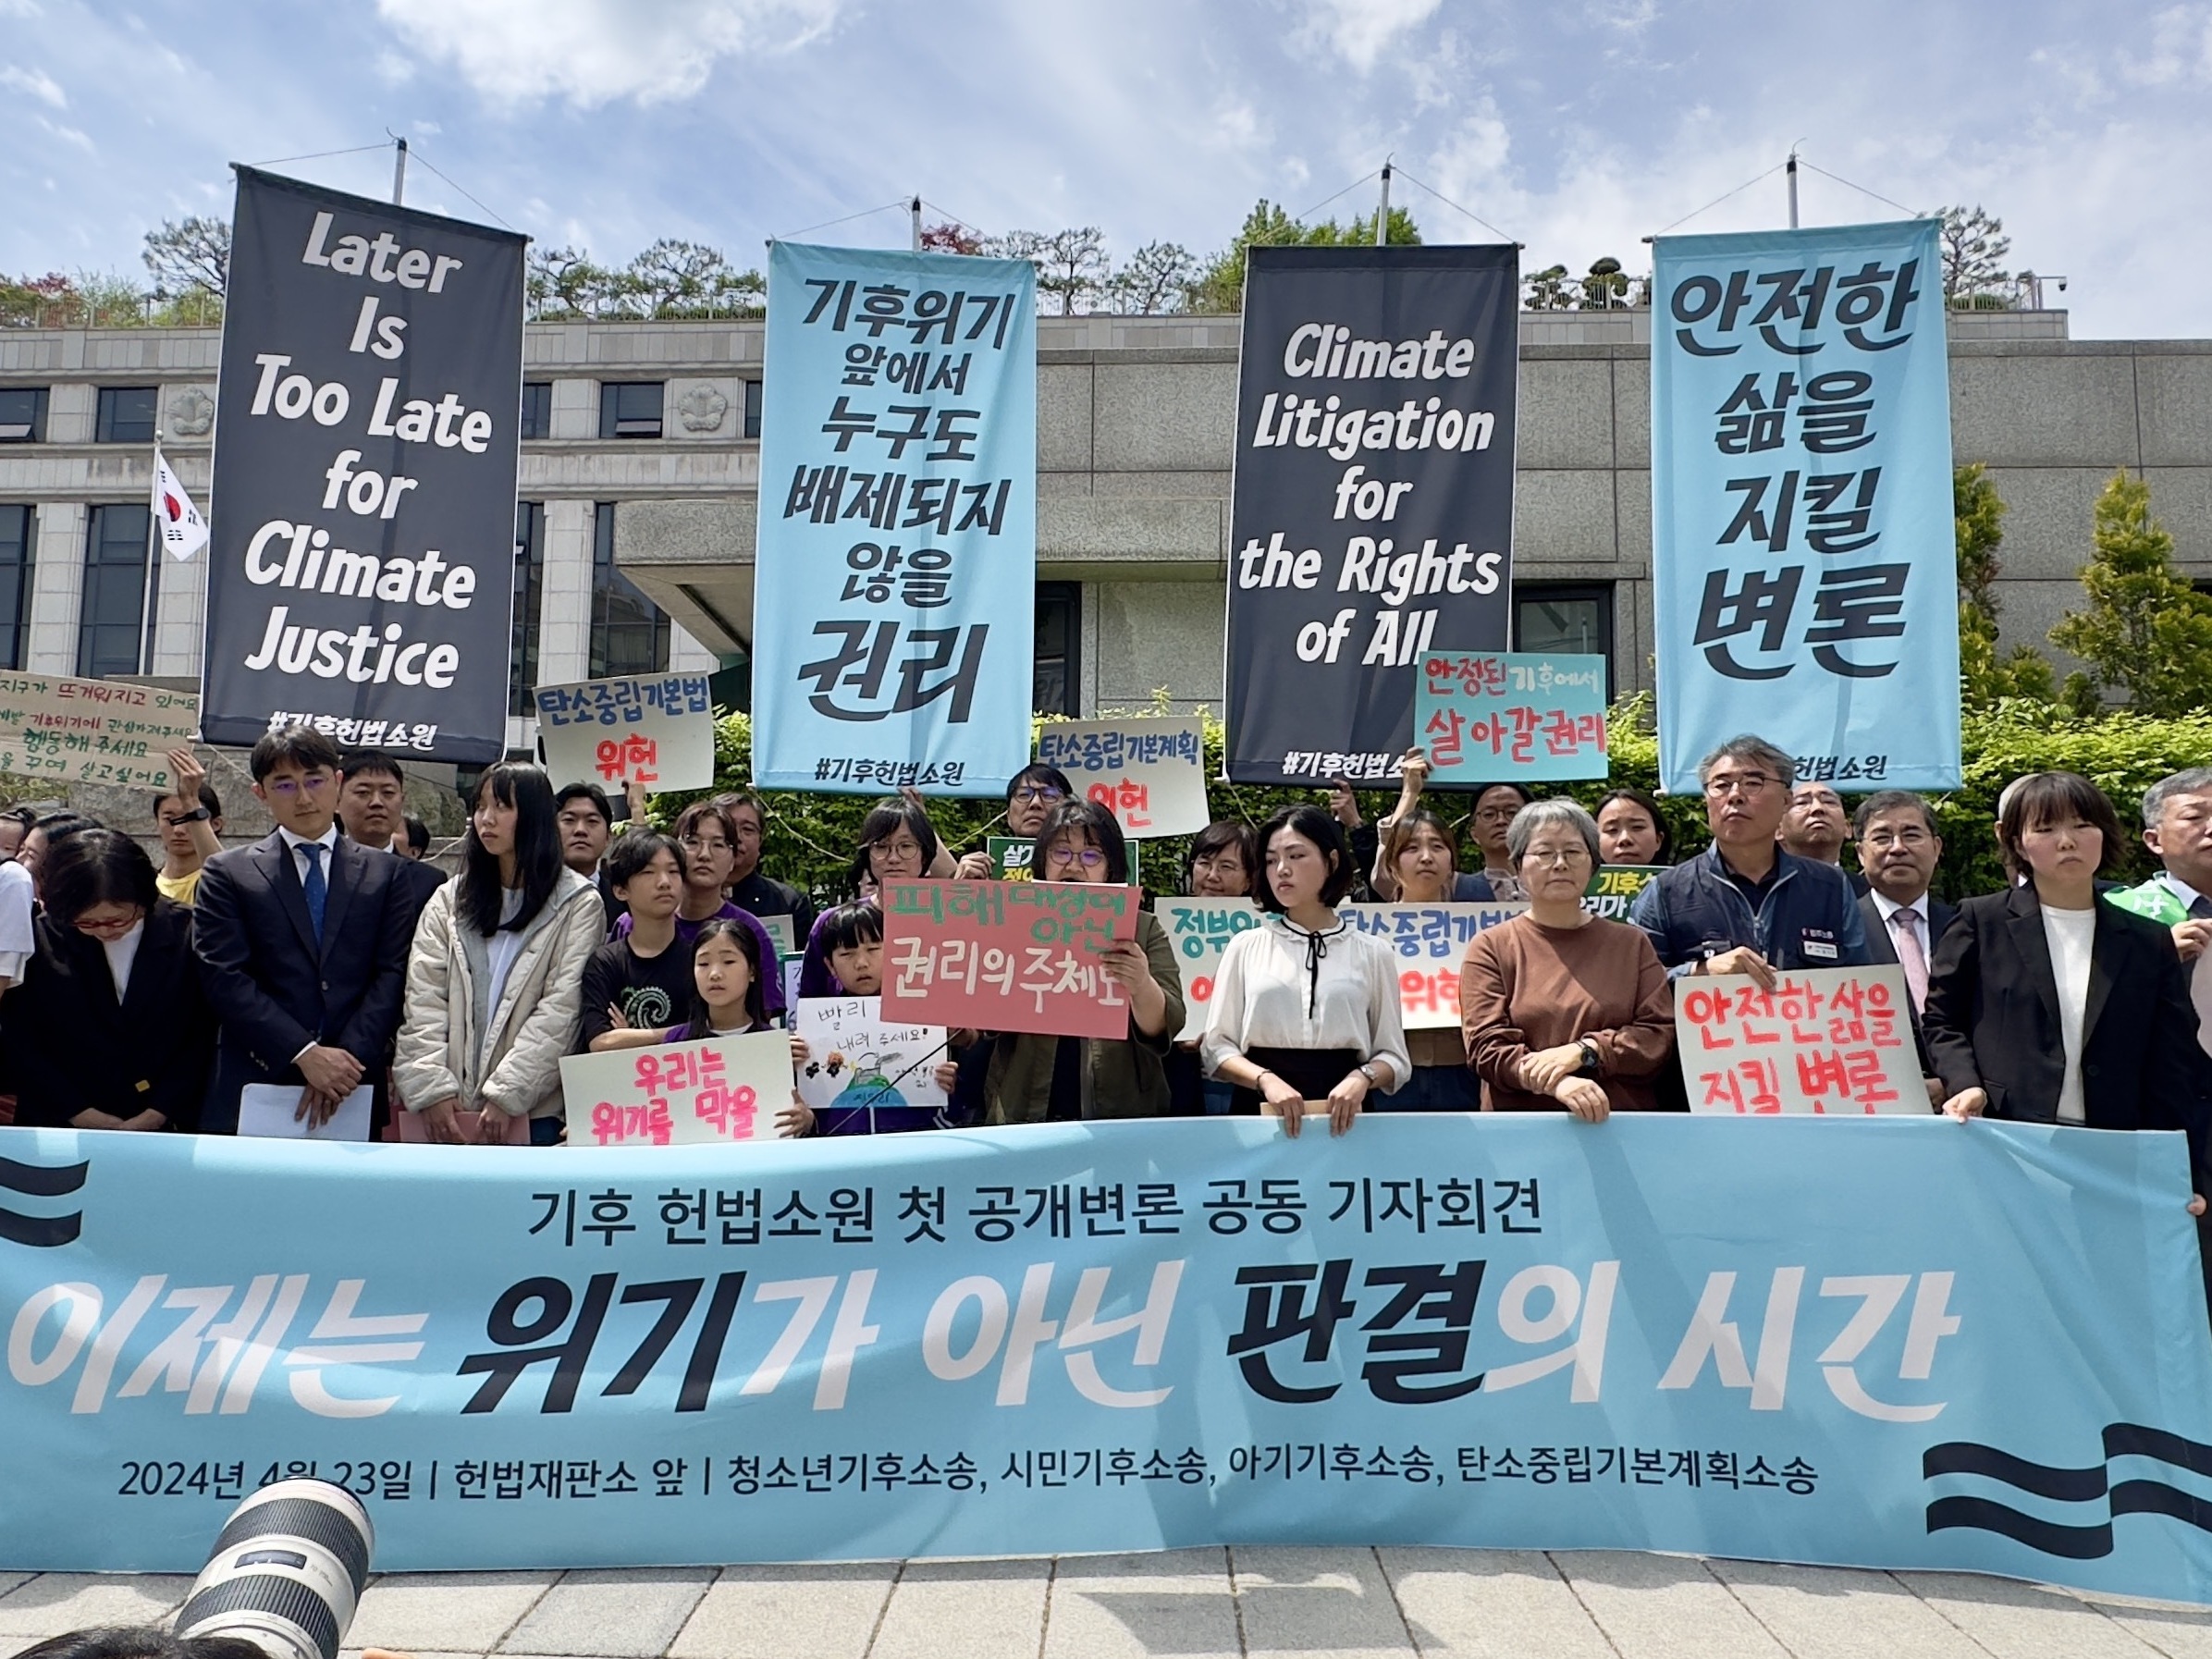 South Koreans sue government over climate change, saying it’s violating human rights